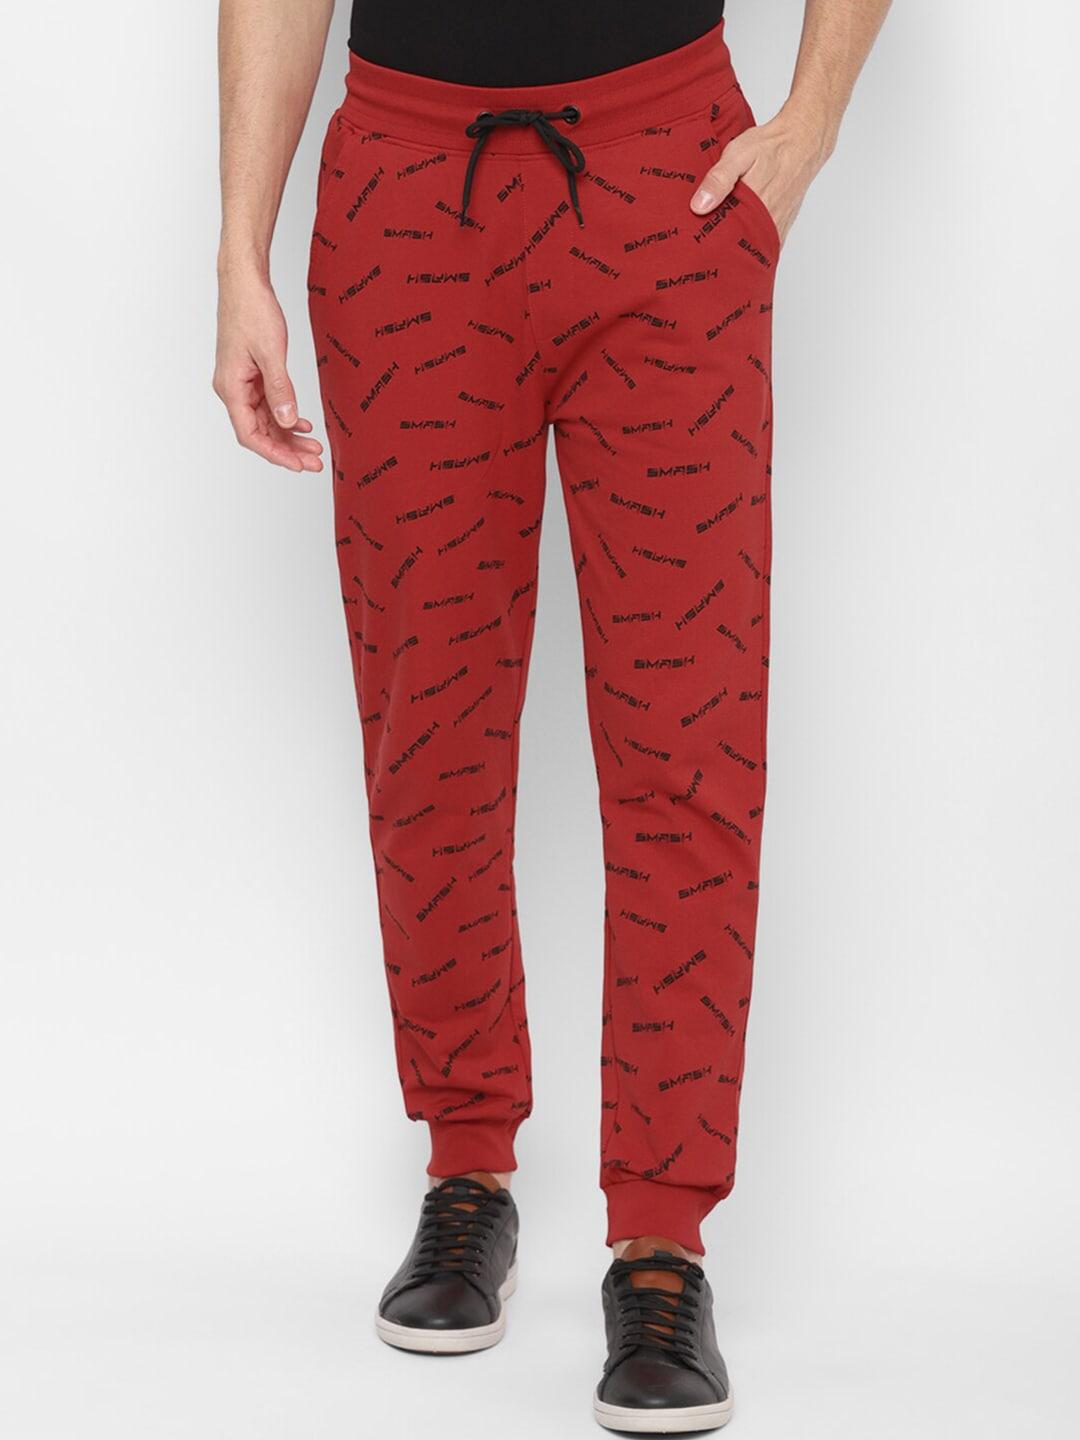 forever-21-men-red-printed-joggers-trousers